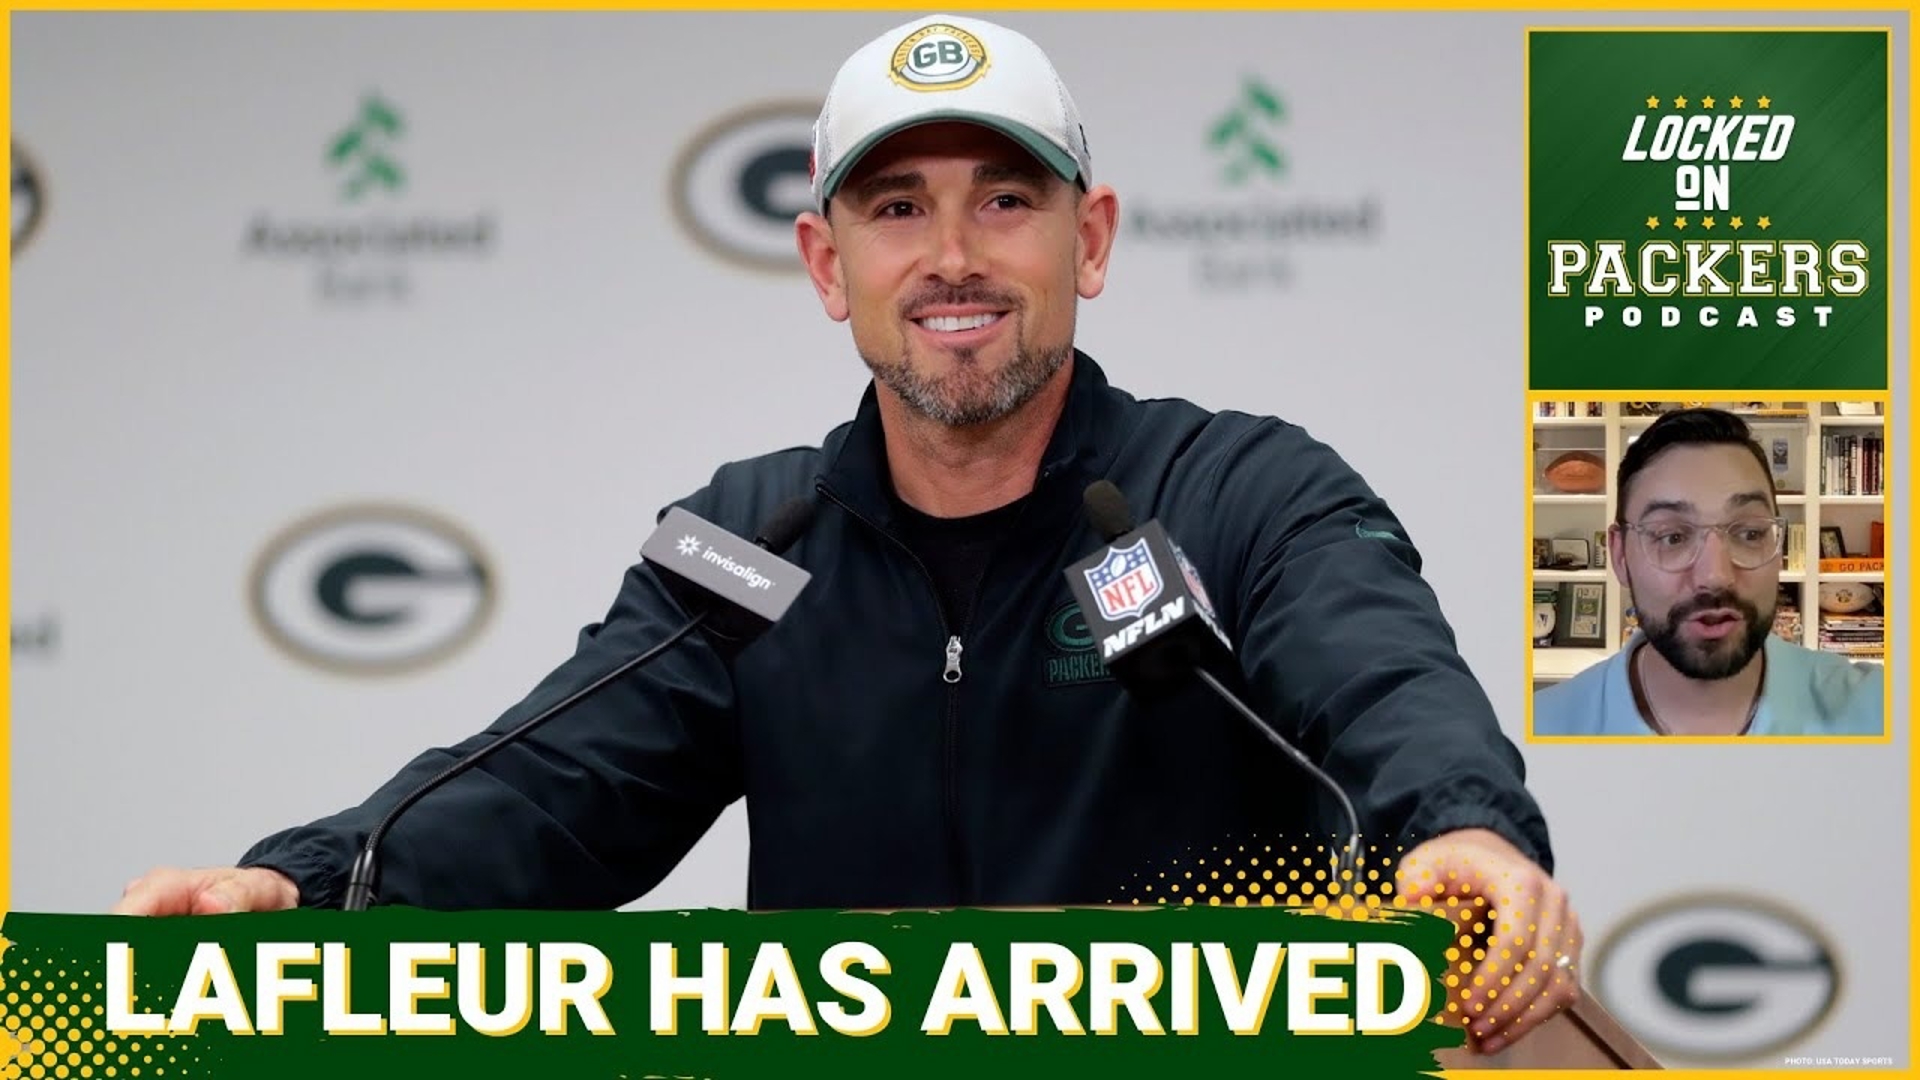 The quarterback caveats are gone; Matt LaFleur has proven he's one of the best coaches in the NFL.